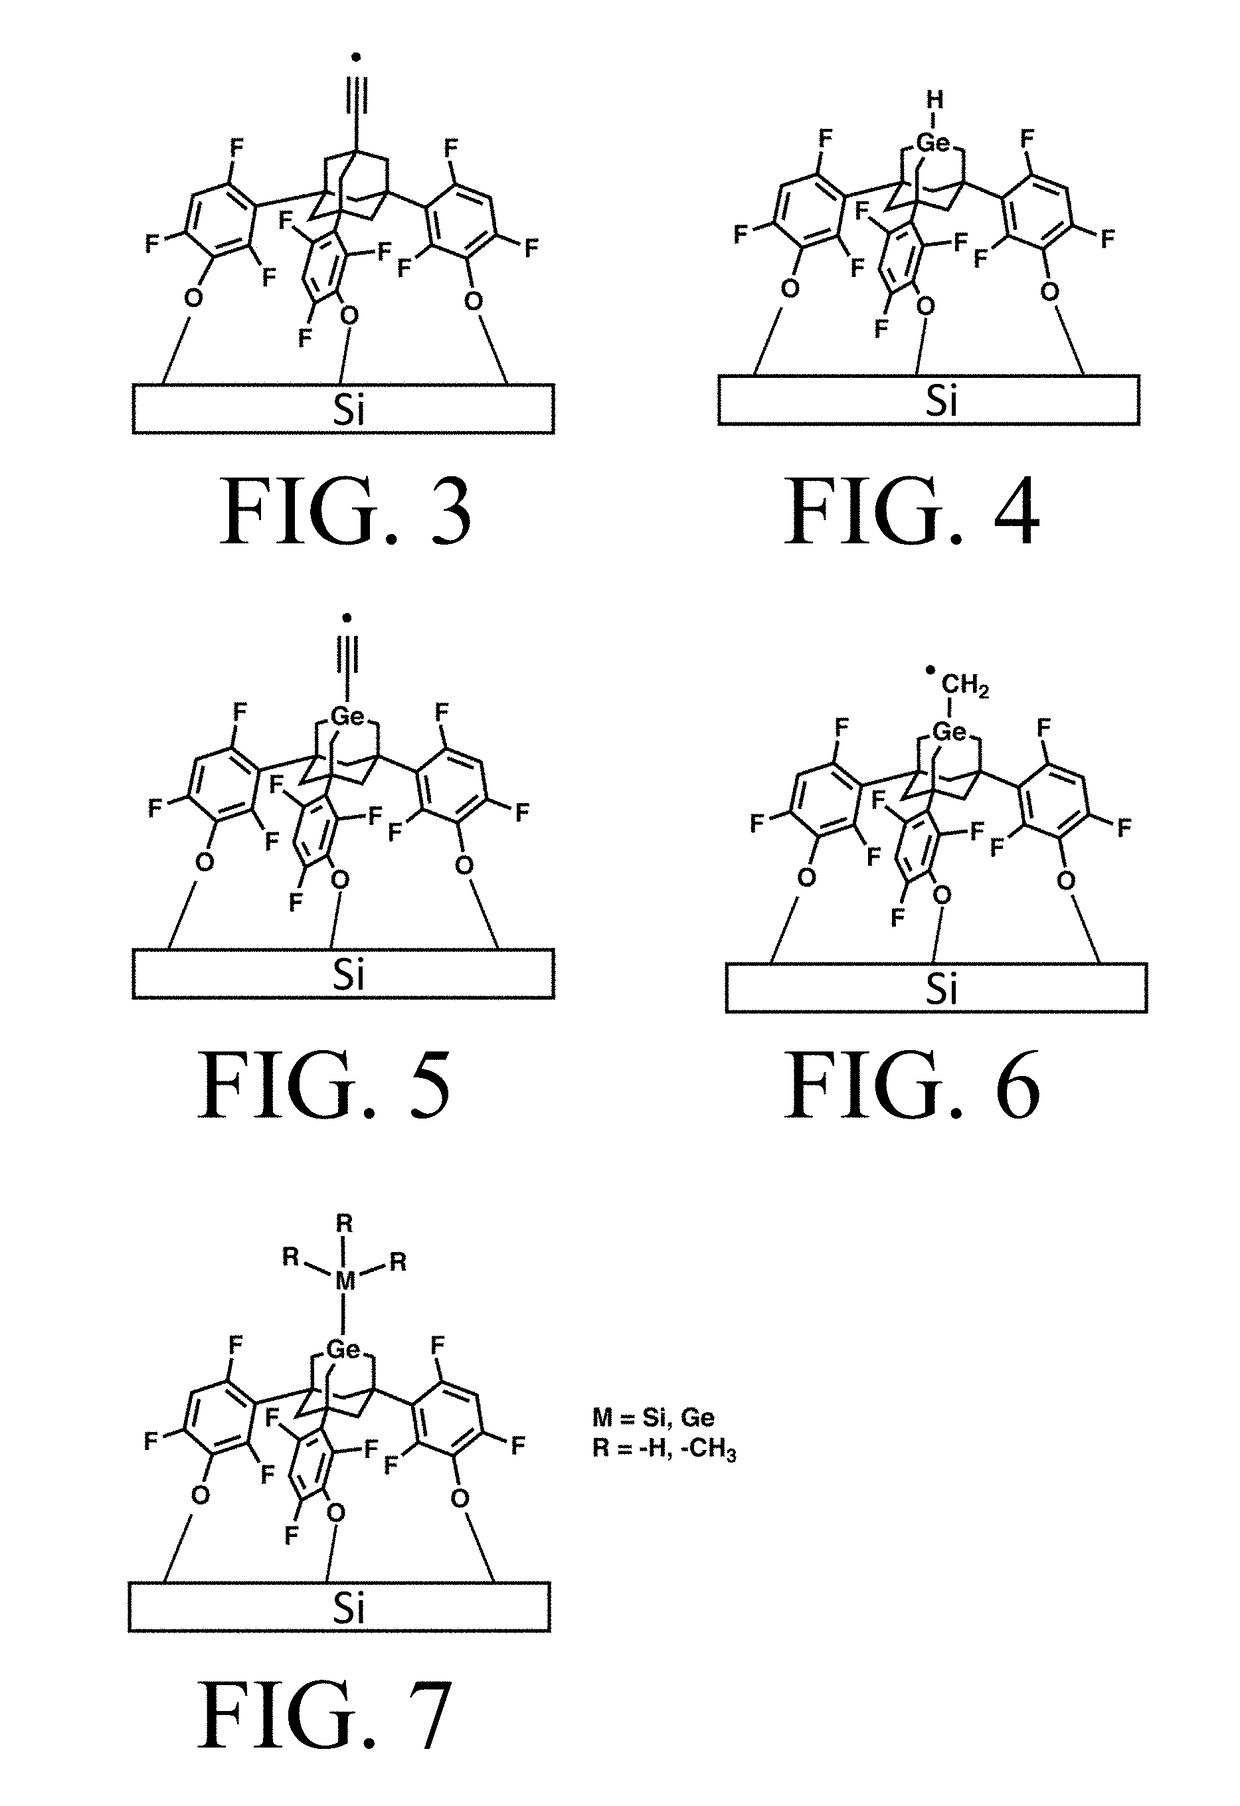 Sequential tip systems and methods for positionally controlled chemistry